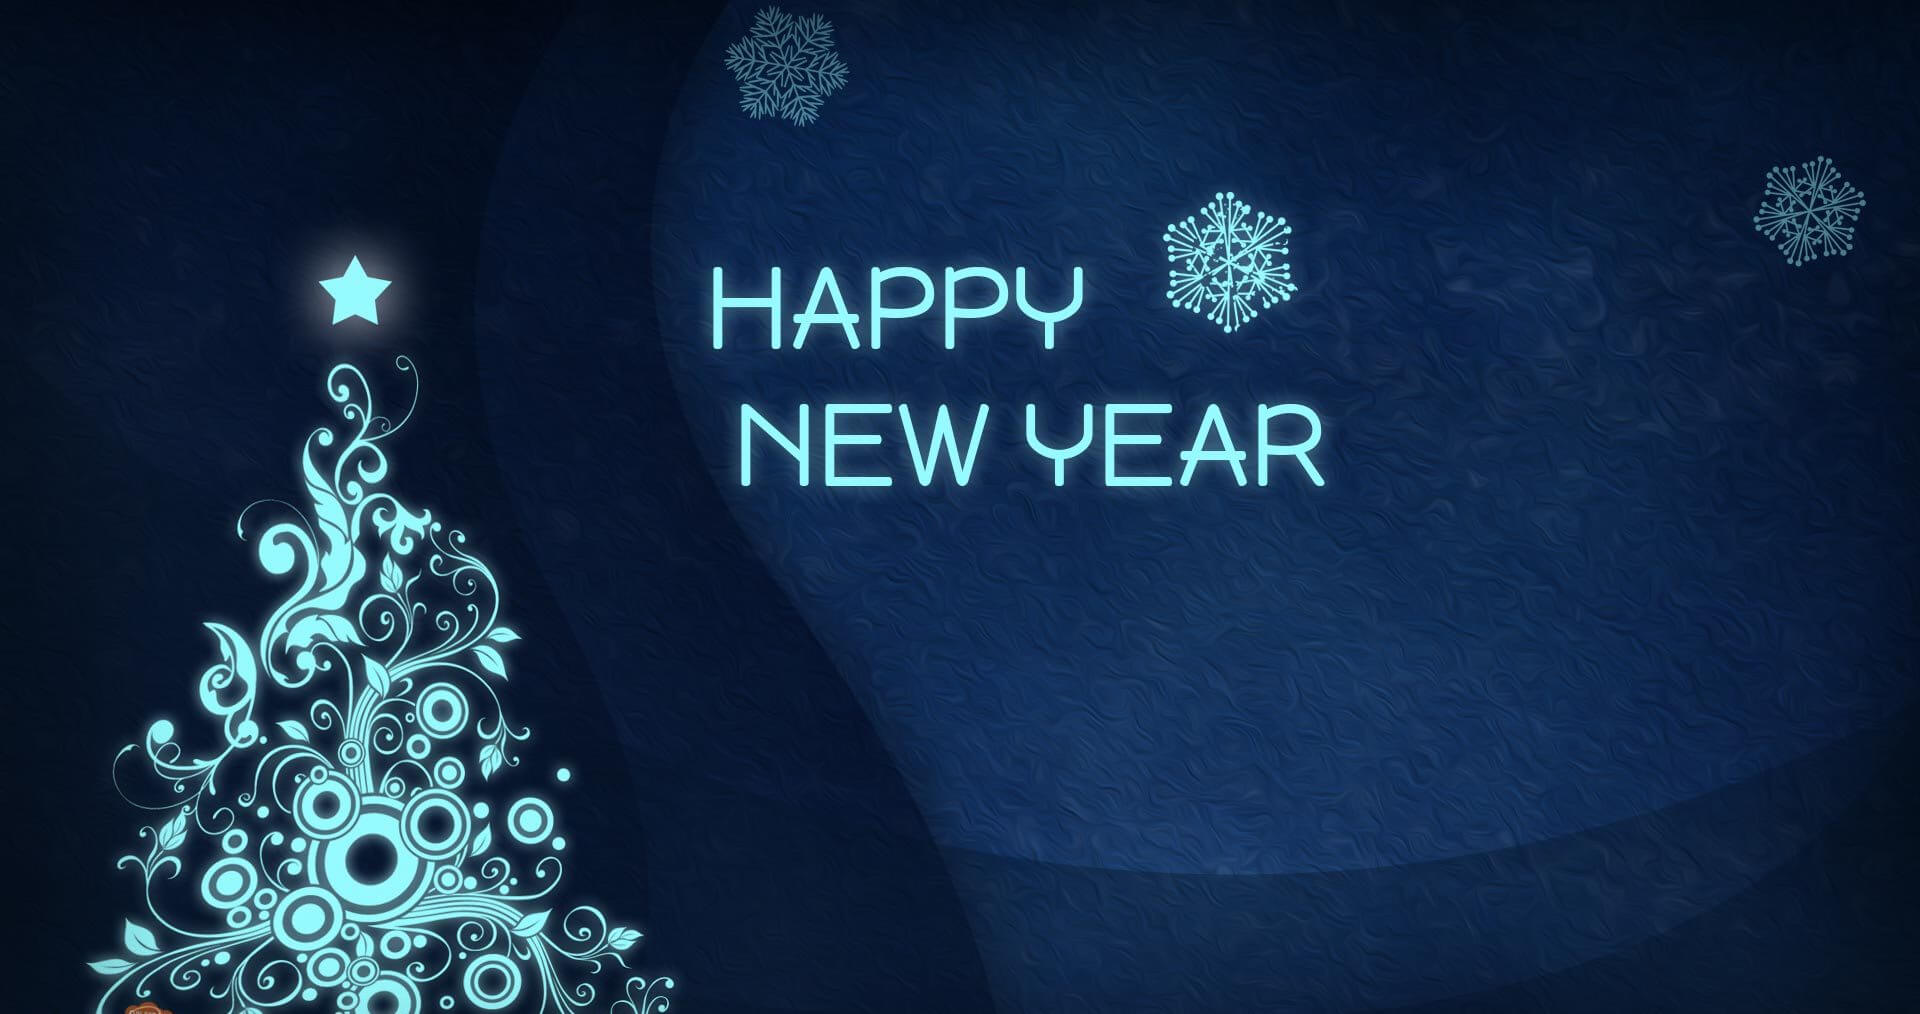 Free Download Happy New Year 2023 Wallpaper